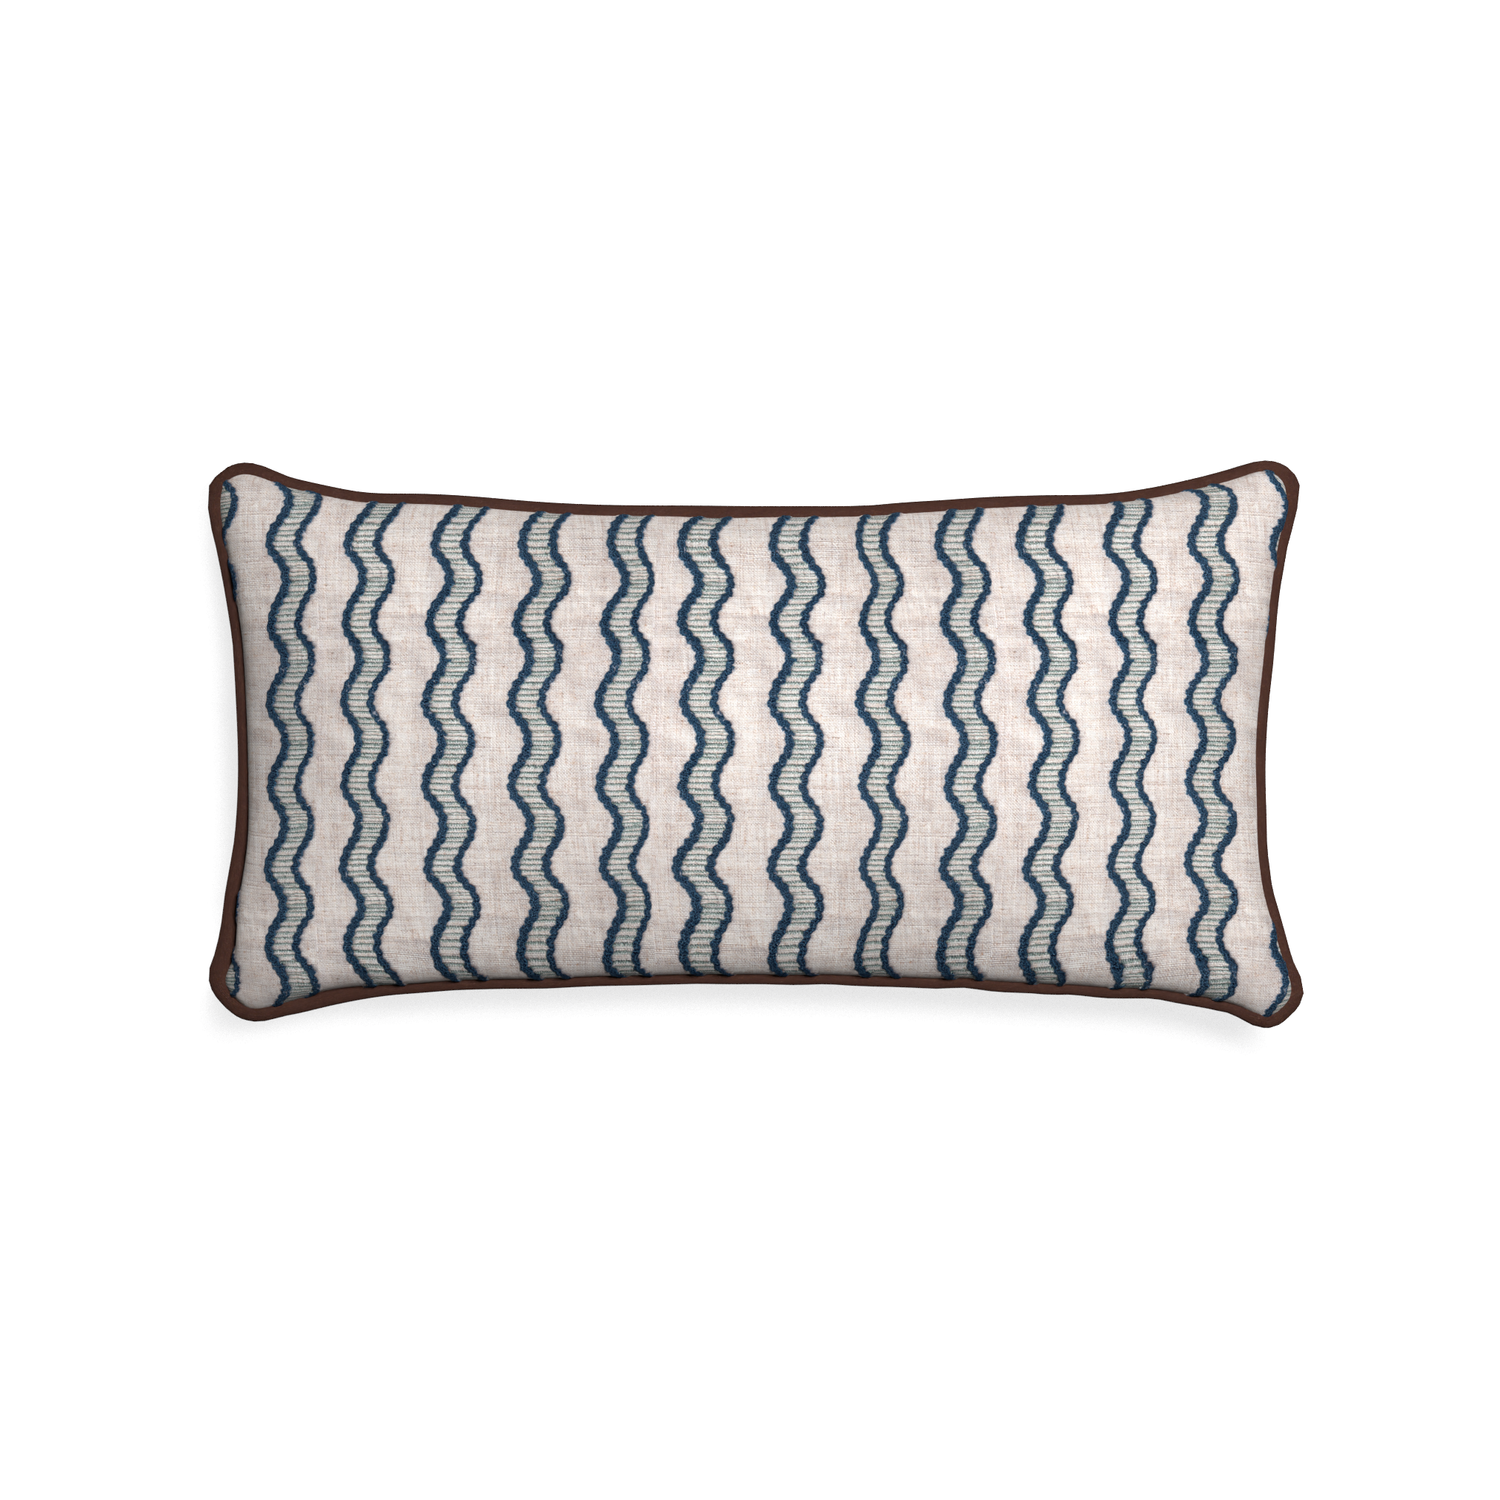 Midi-lumbar beatrice custom embroidered wavepillow with w piping on white background